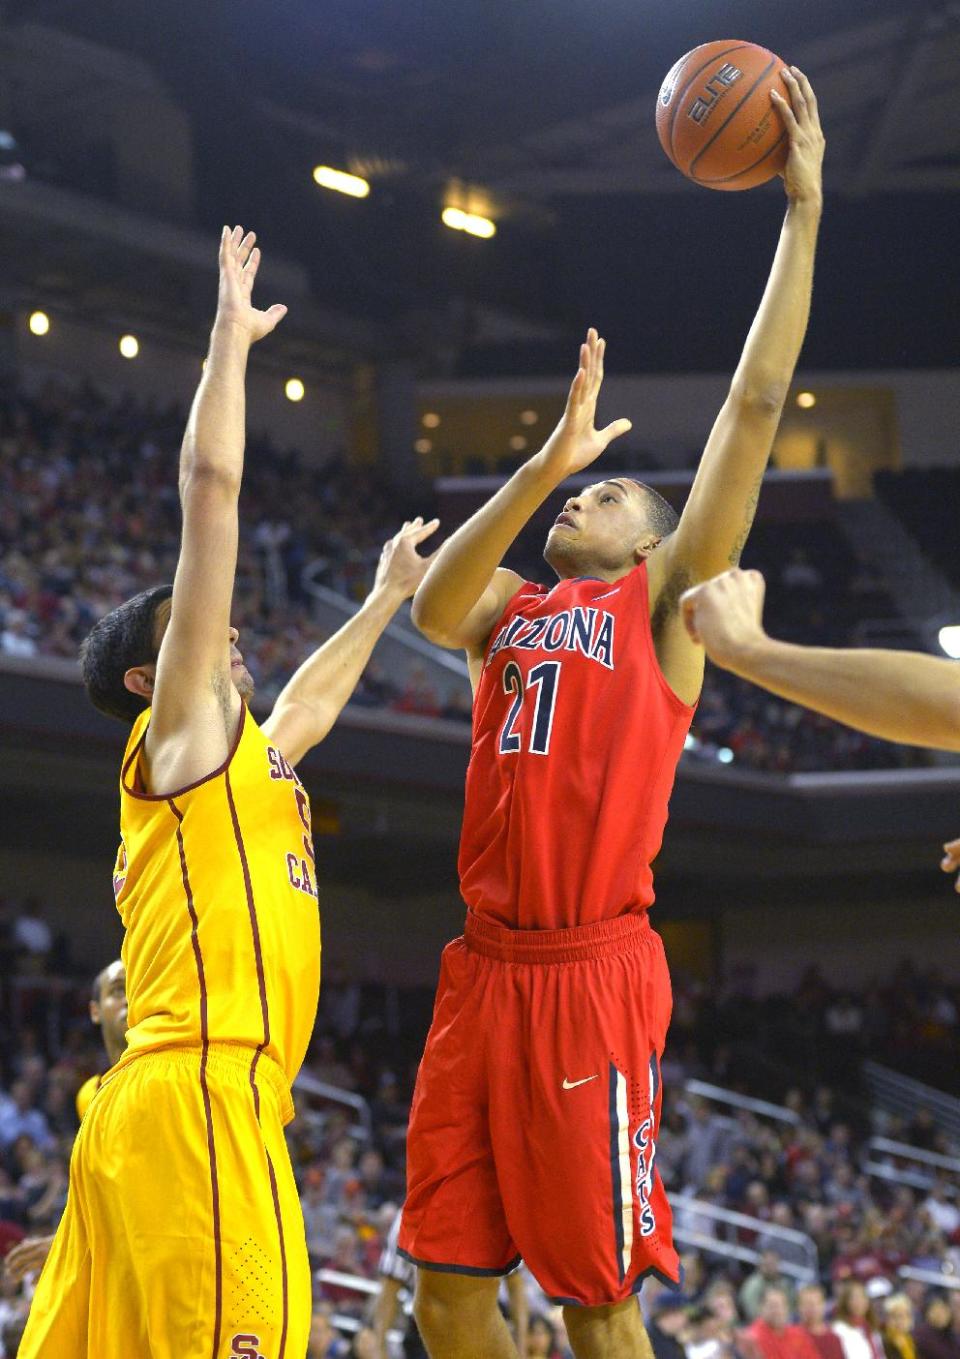 Arizona forward Brandon Ashley, right, puts up a shot as Southern California center Omar Oraby defends during the first half of an NCAA college basketball game, Sunday, Jan. 12, 2014, in Los Angeles. (AP Photo/Mark J. Terrill)